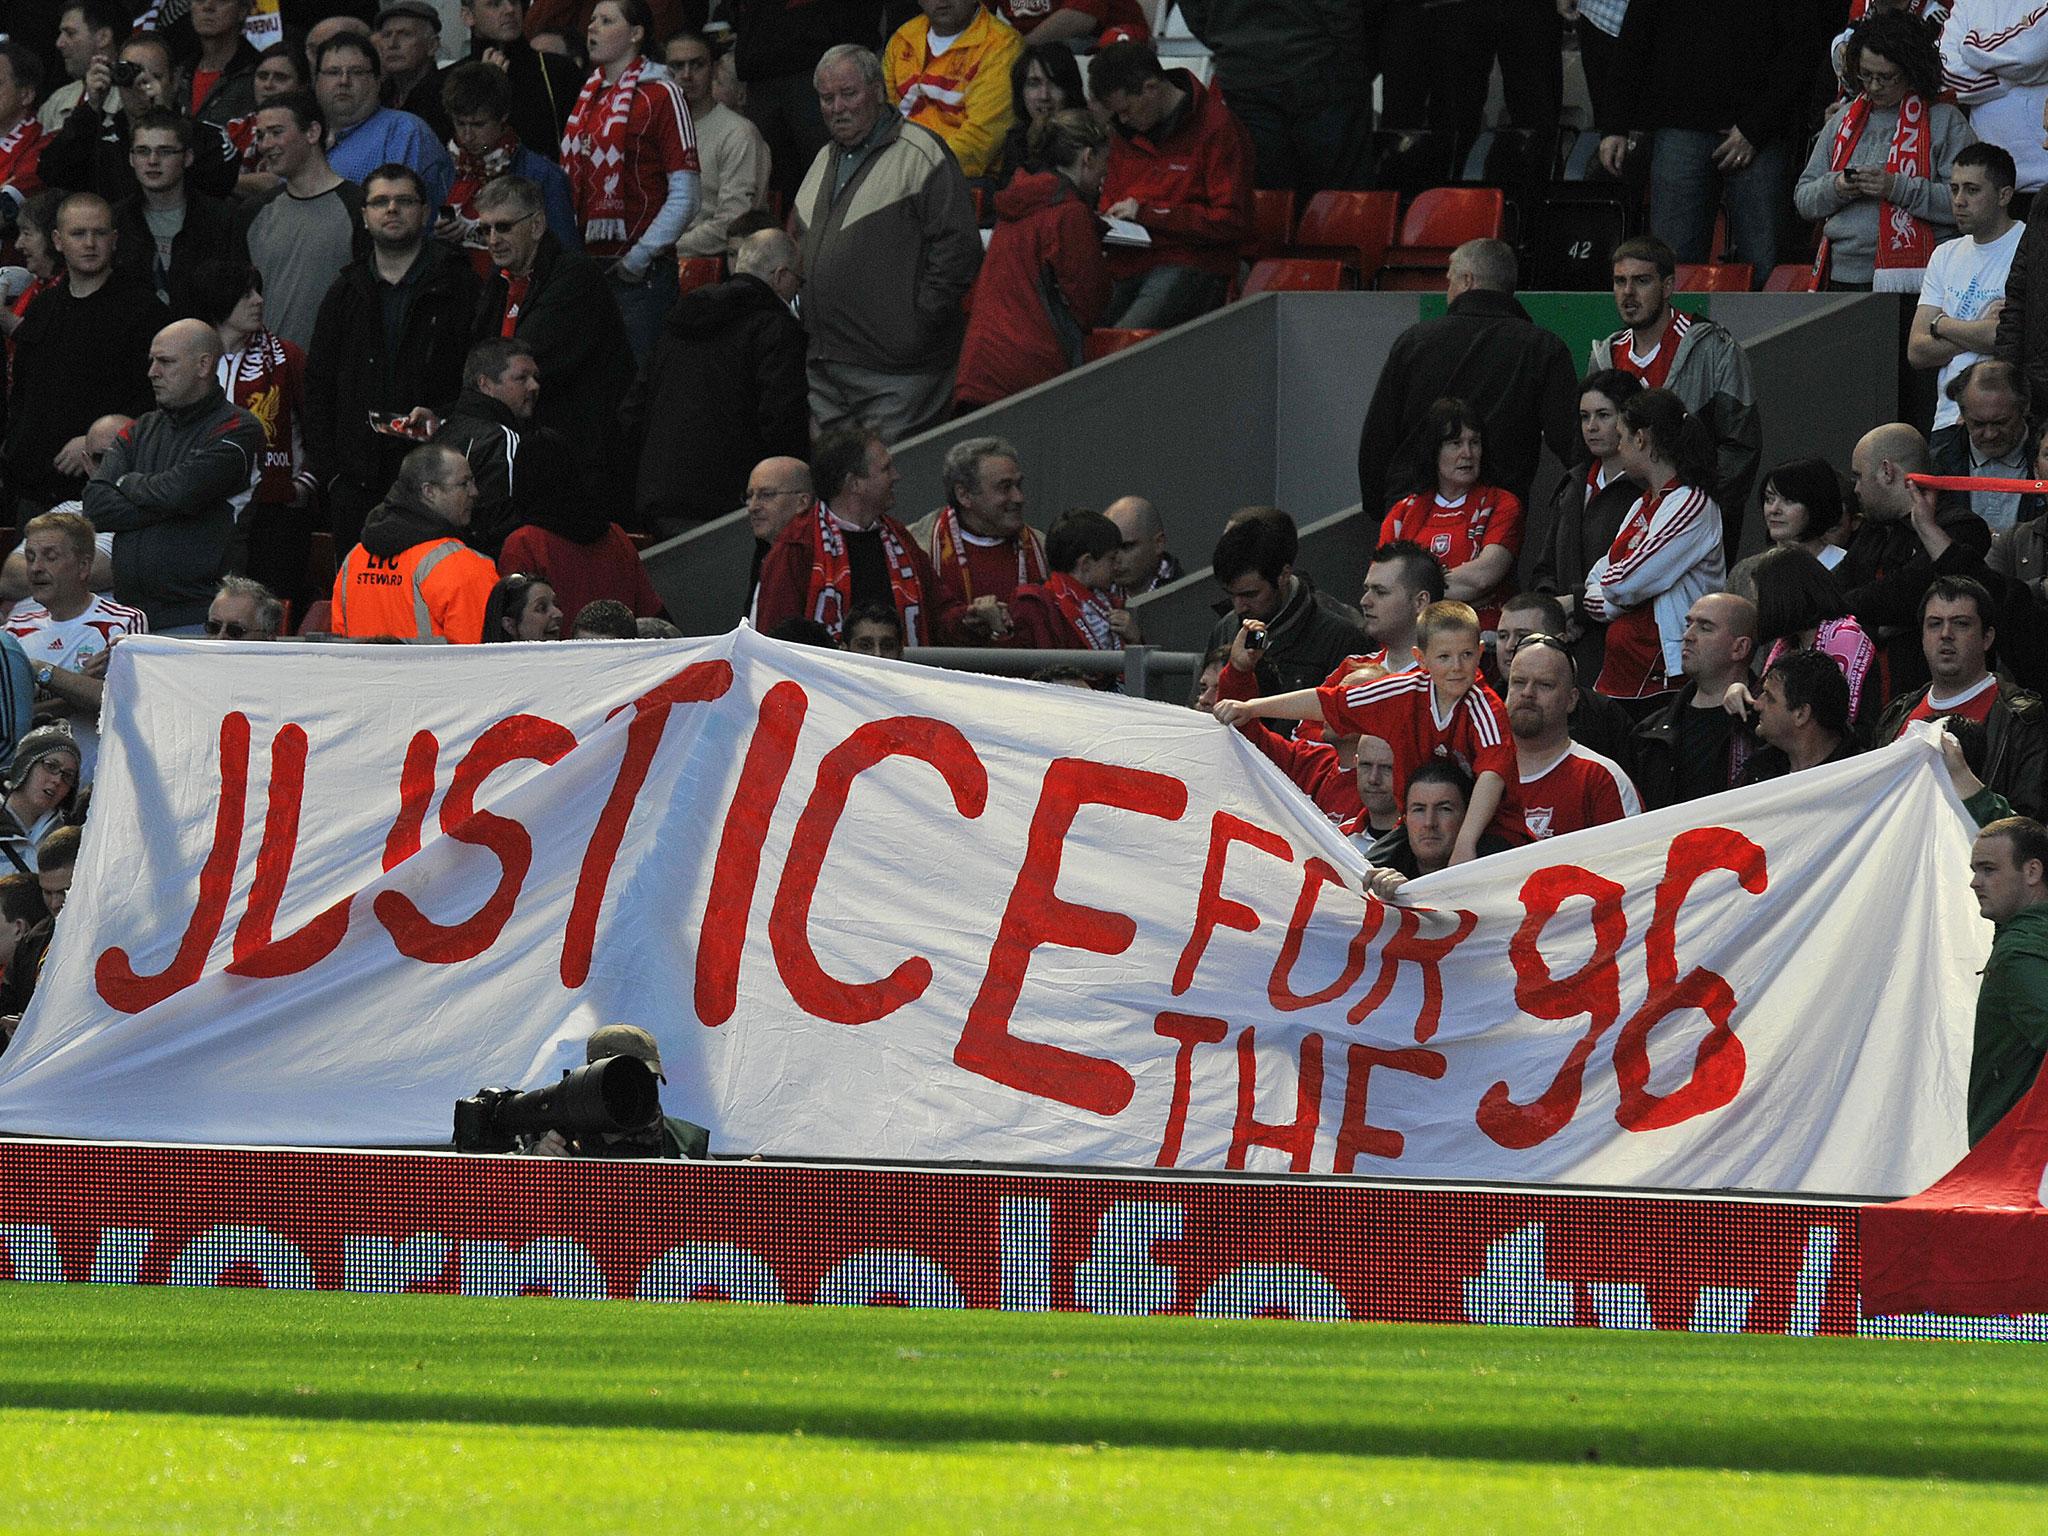 Liverpool fans have boycotted The Sun since the false report was published on 1989’s Hillsborough disaster